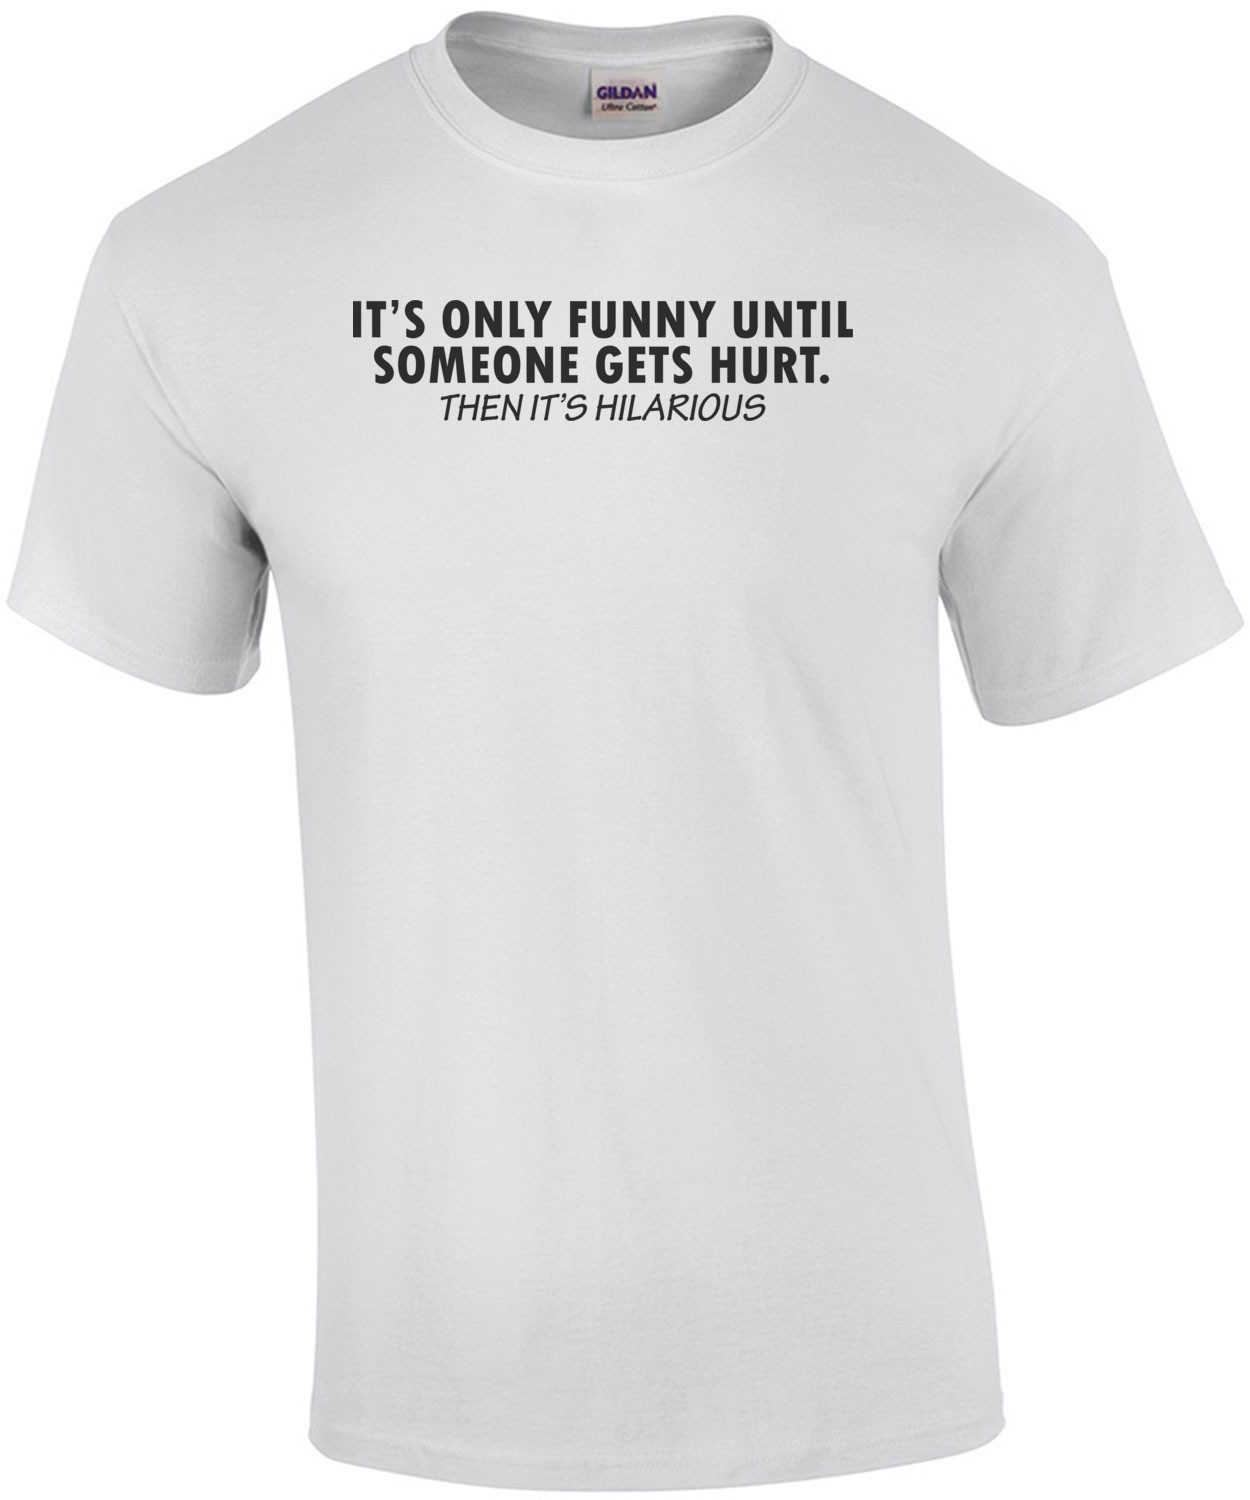 It's Only Funny Until Someone Gets Hurt Shirt